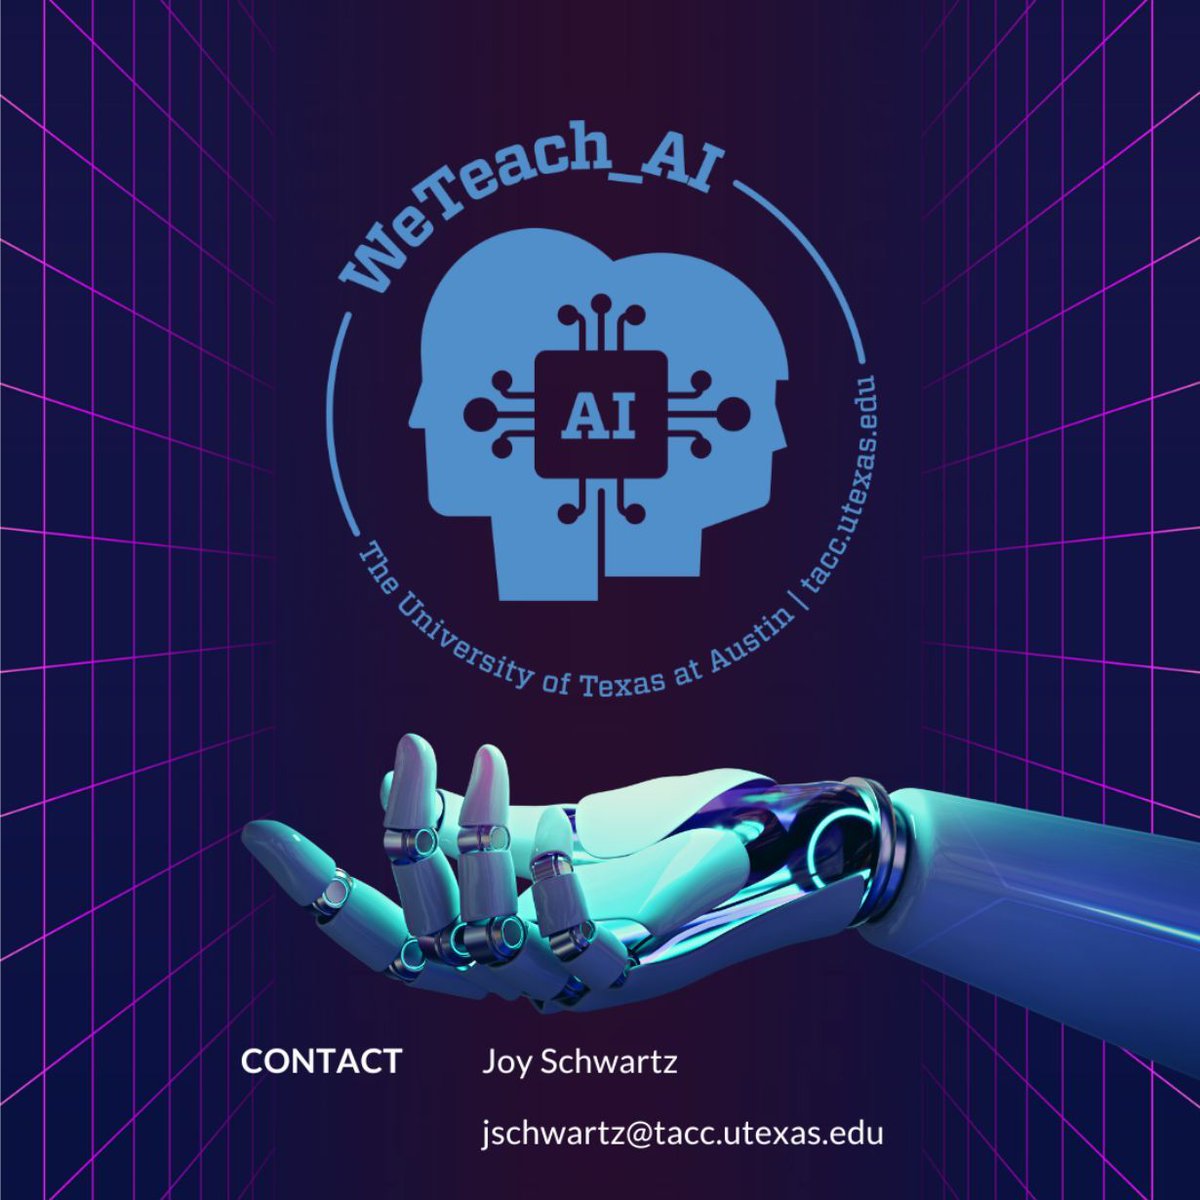 Join the WeTeach_AI High School Hub and shape tomorrow’s leaders! Enhance your pedagogical practices and empower the next generation of innovators to responsibly harness the power of #artificialintelligence and machine learning.

Learn more: buff.ly/3vafGt0